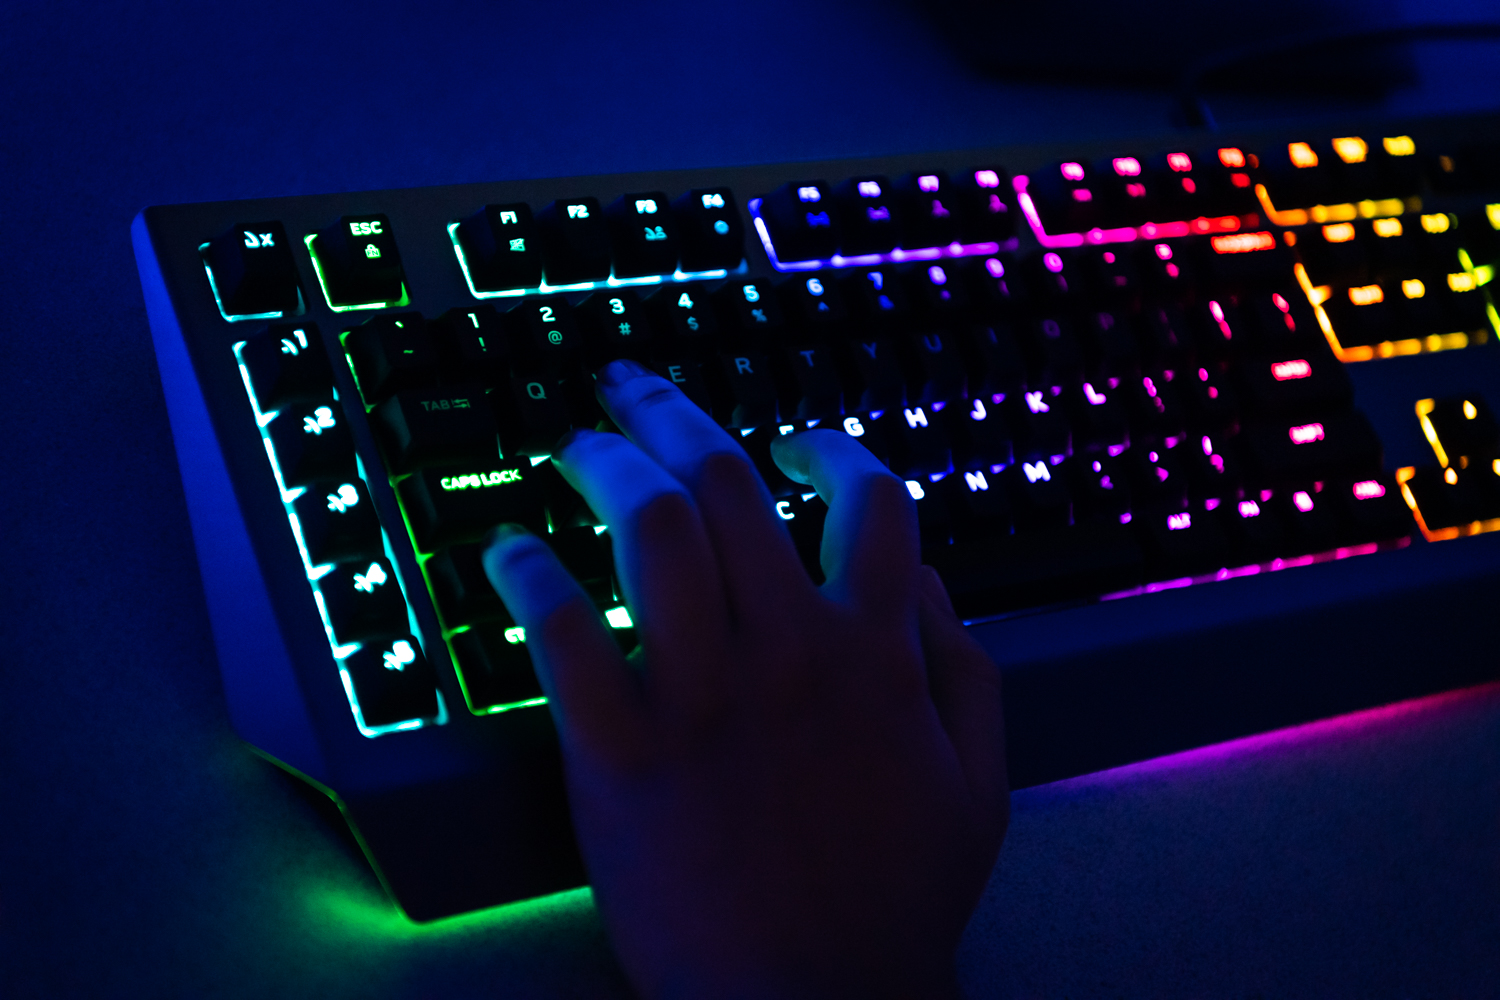 A hand is seen on a lit keyboard as a student plays an esport game